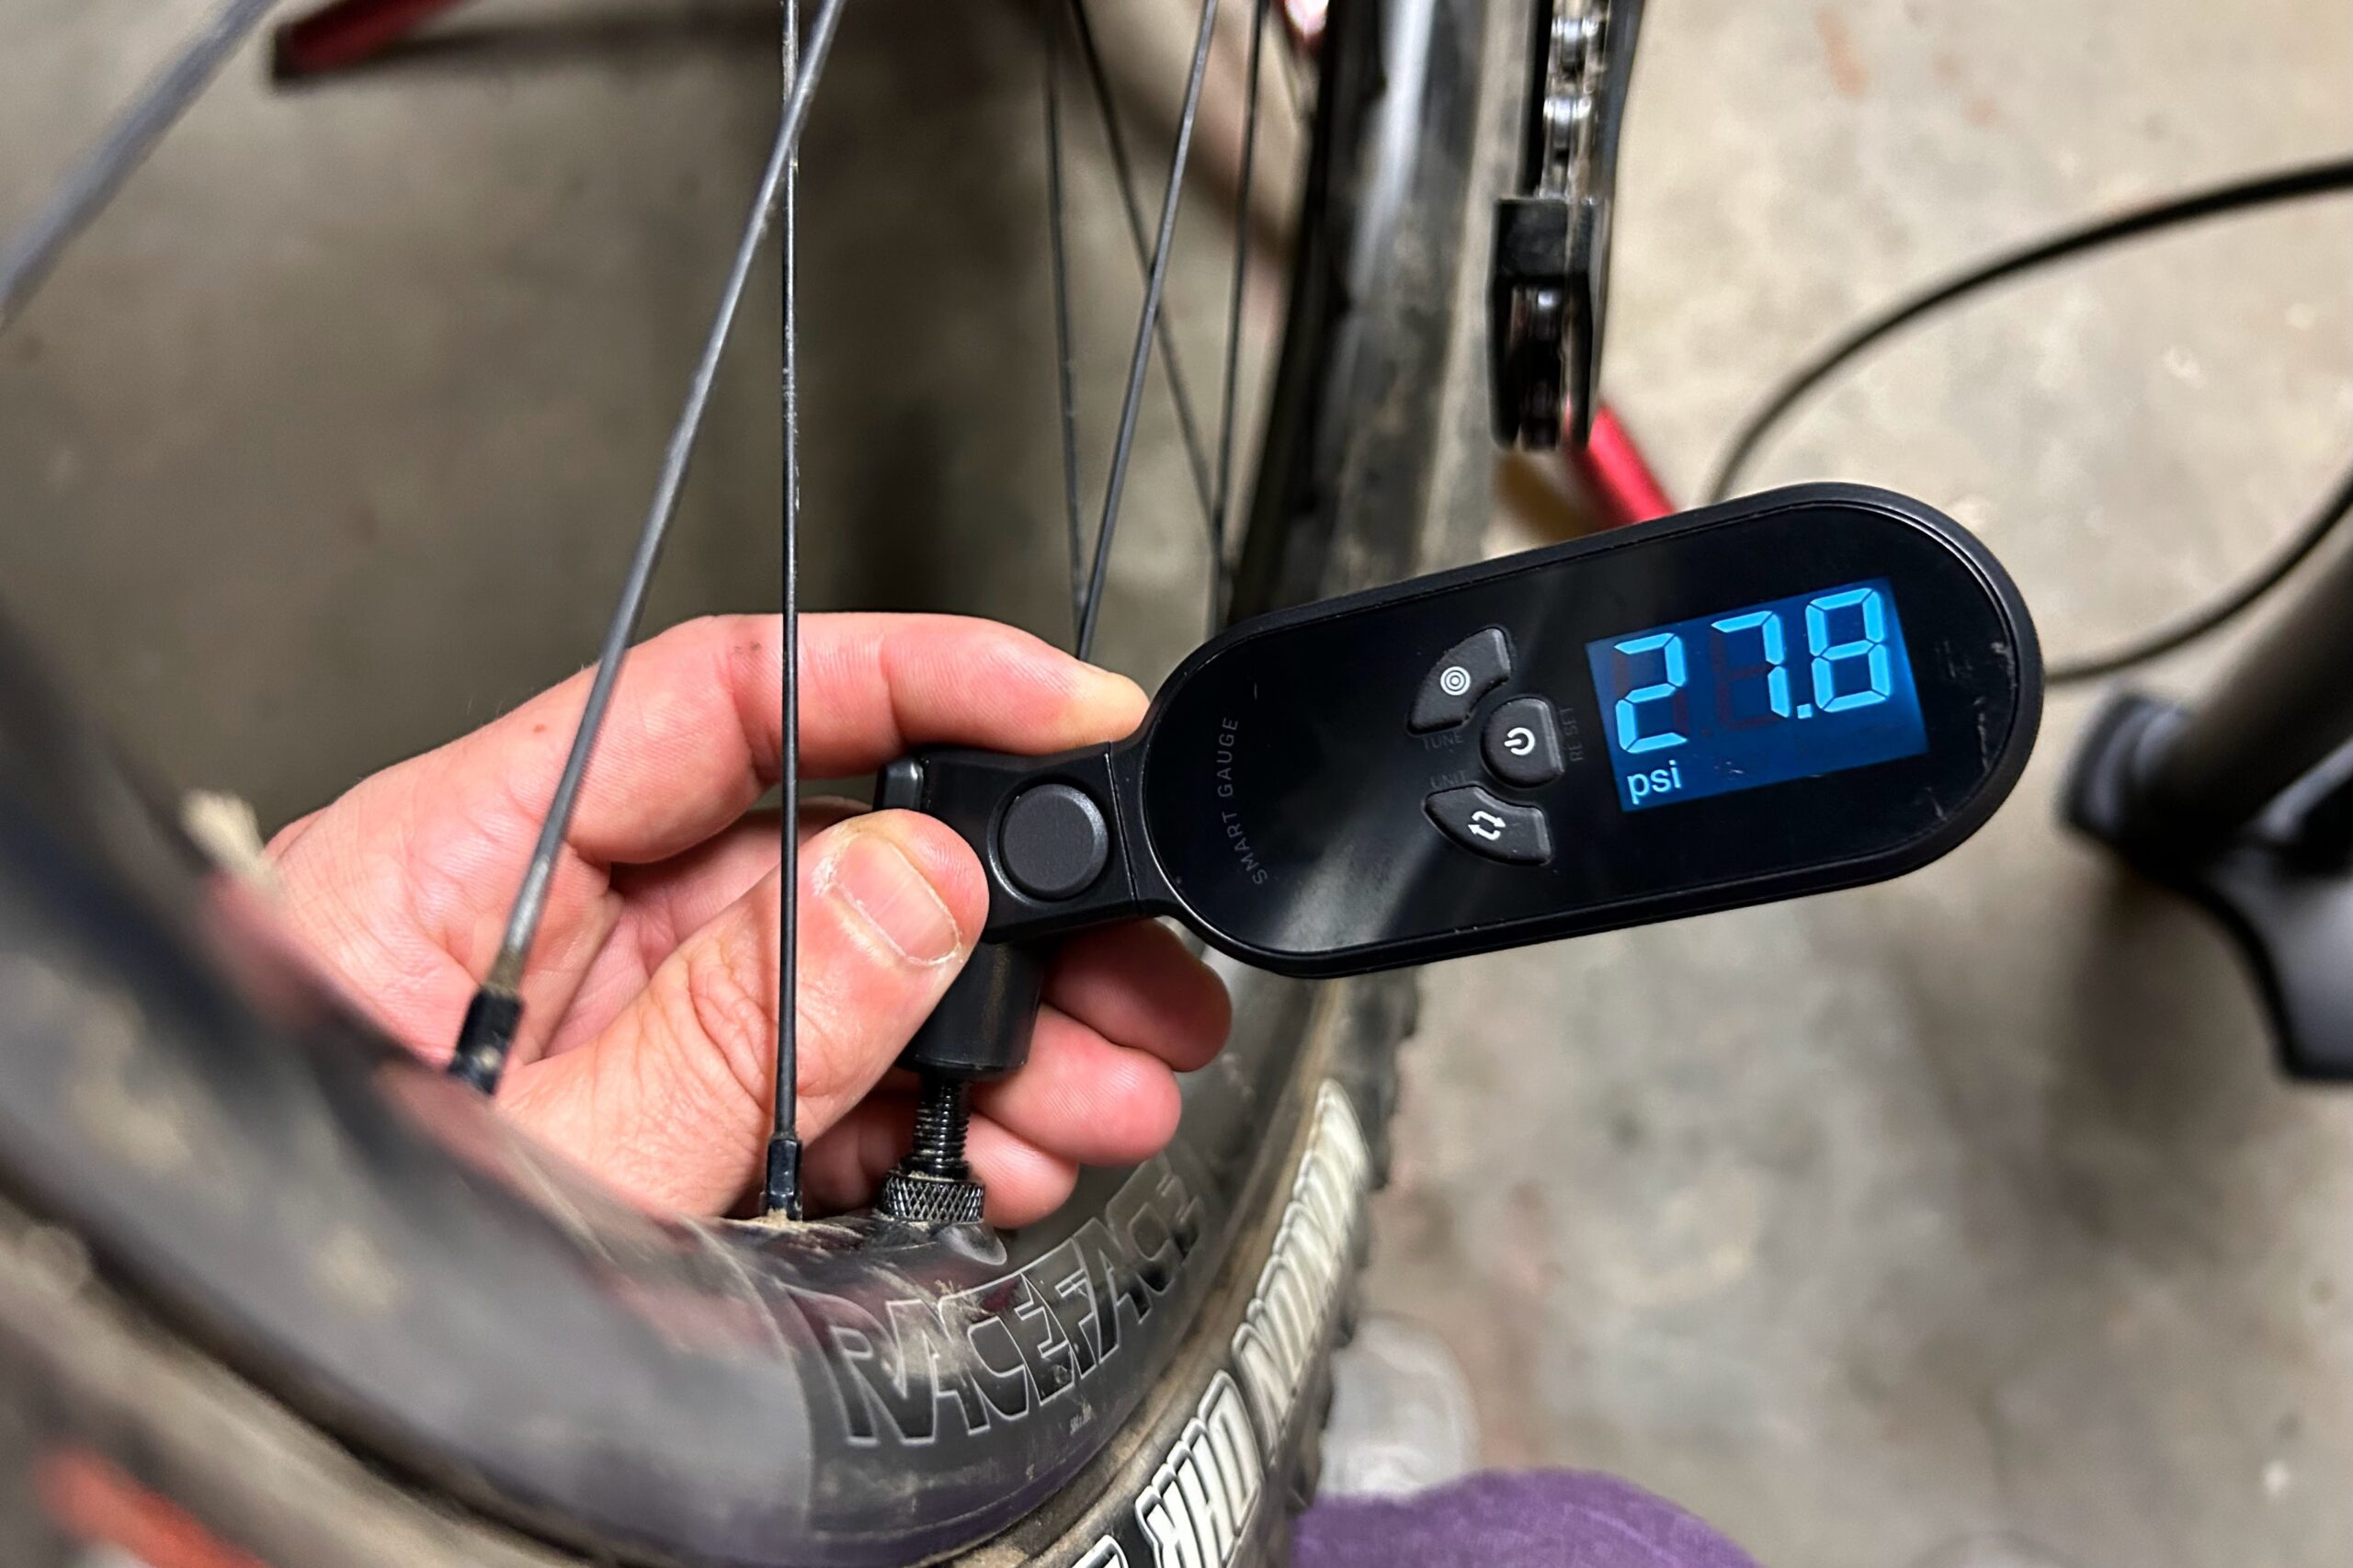 Using the ToPeak SmartGauge D2X to check the accuracy of the bike pump gauges